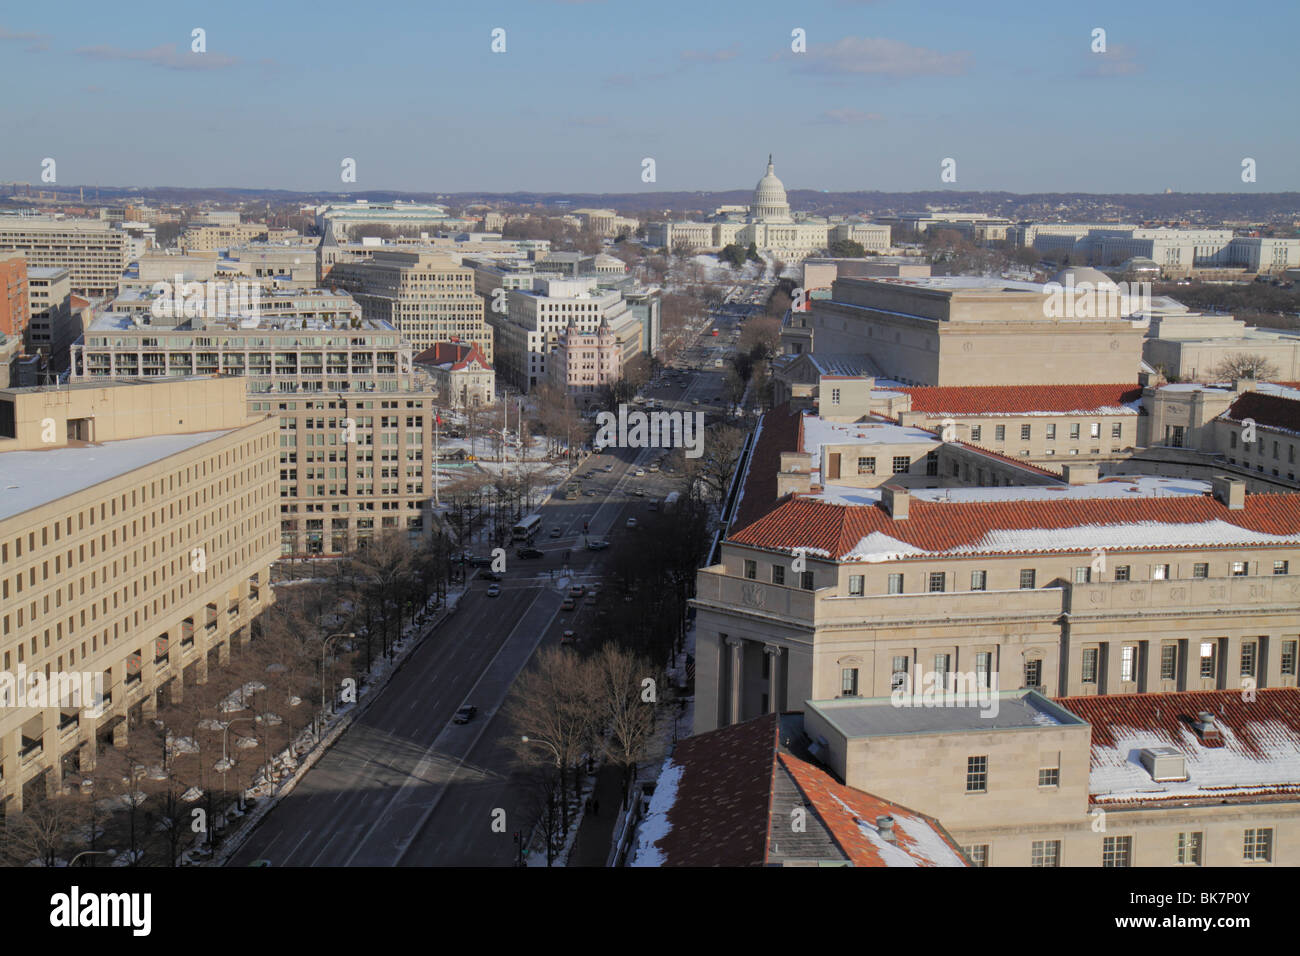 Washington DC,Pennsylvania Avenue,United States Capitol building,dome,rooftops,office buildings,city skyline,car,traffic,view from Old Post Office Pav Stock Photo